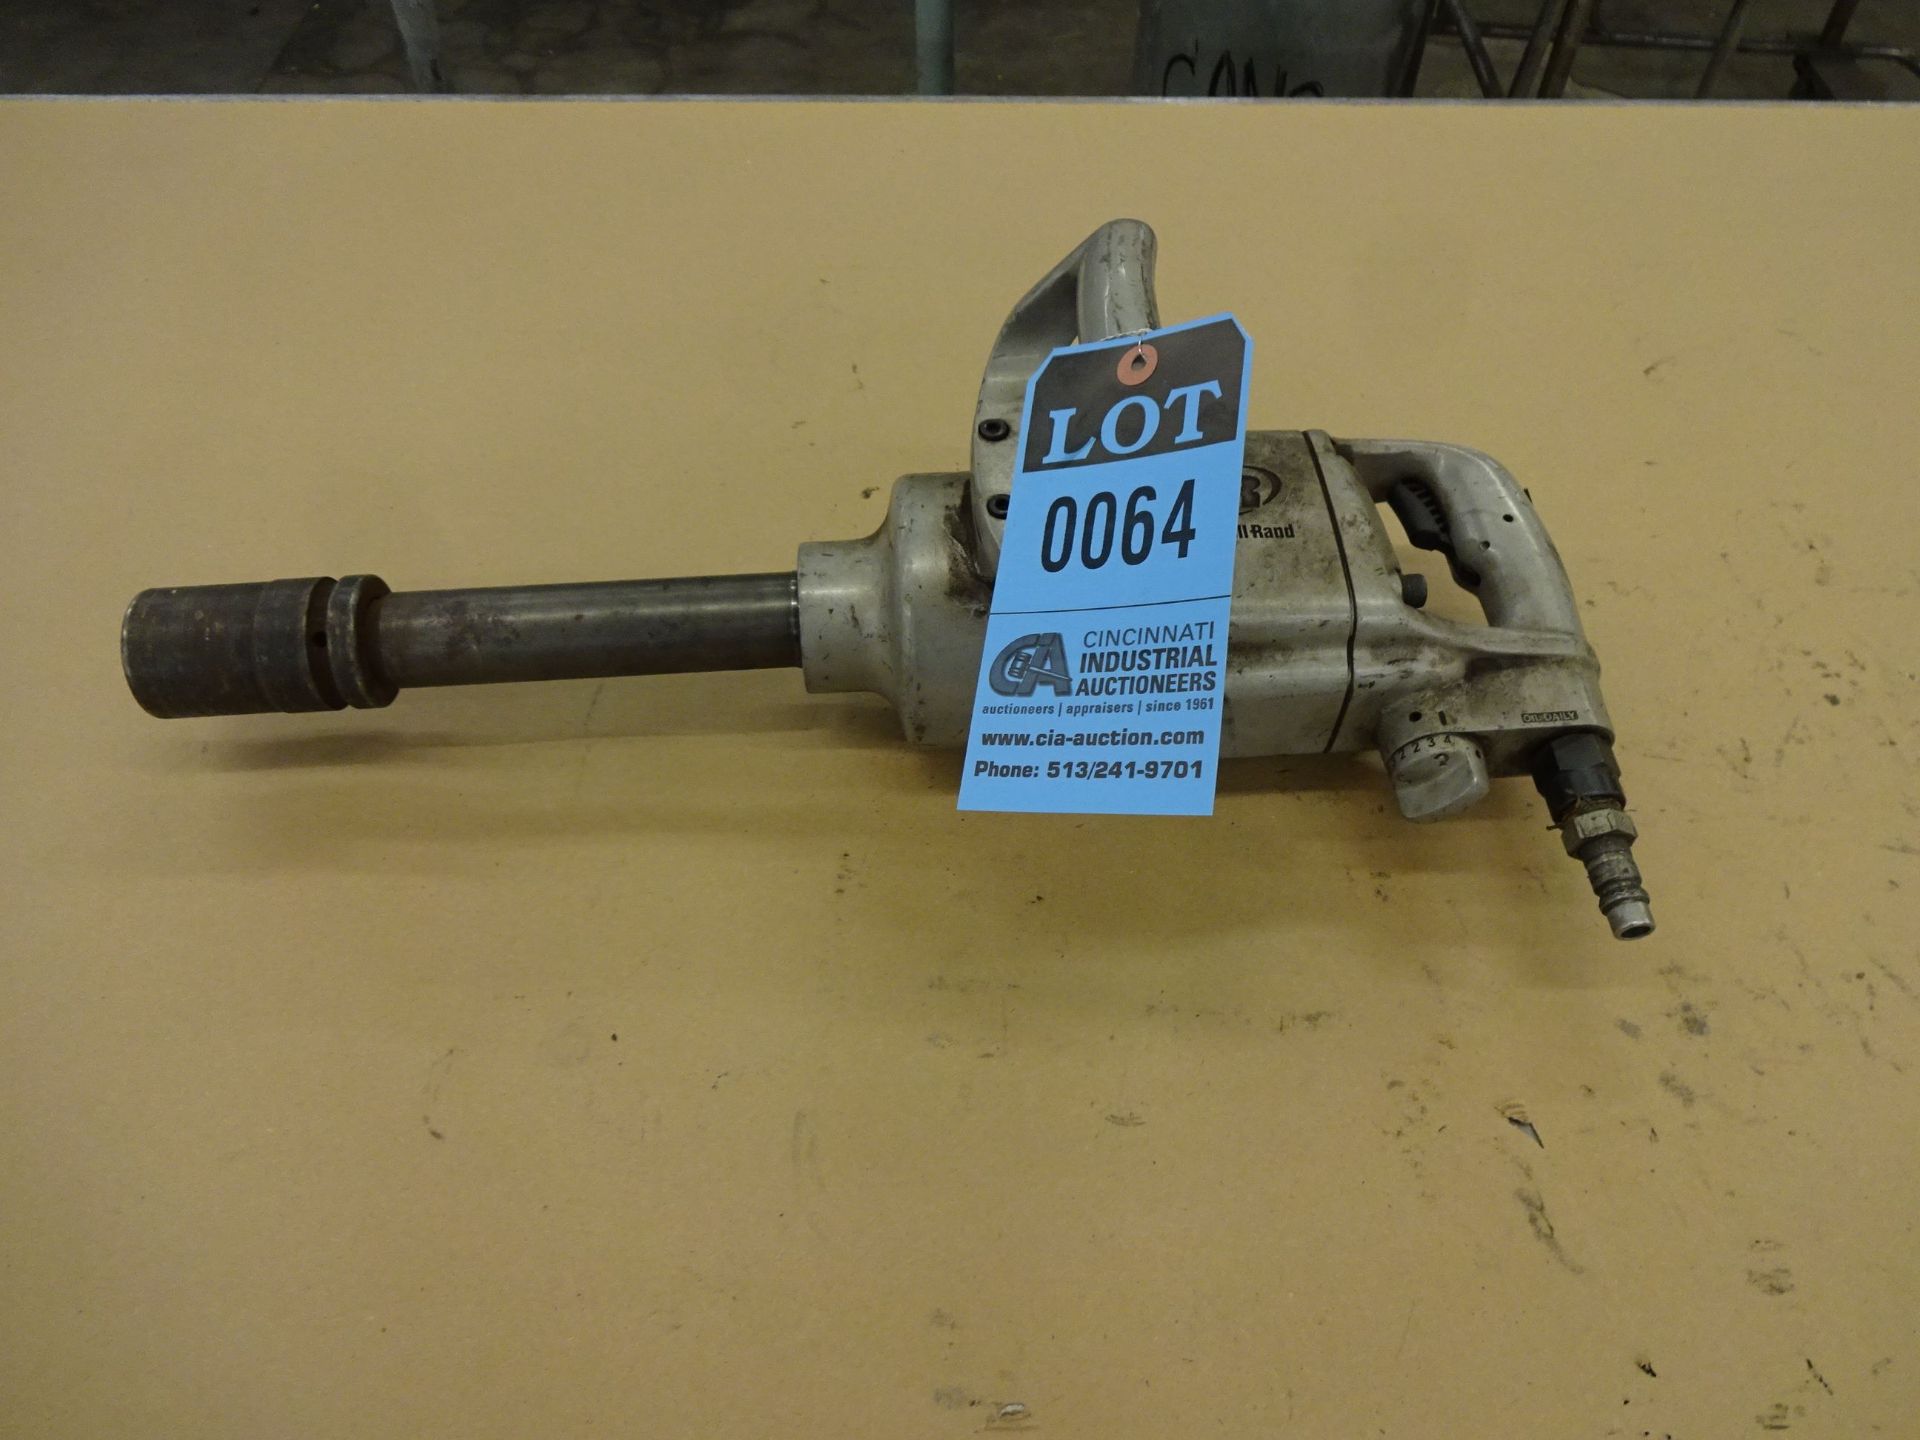 1" INGERSOLL RAND PNEUMATIC IMPACT WRENCH